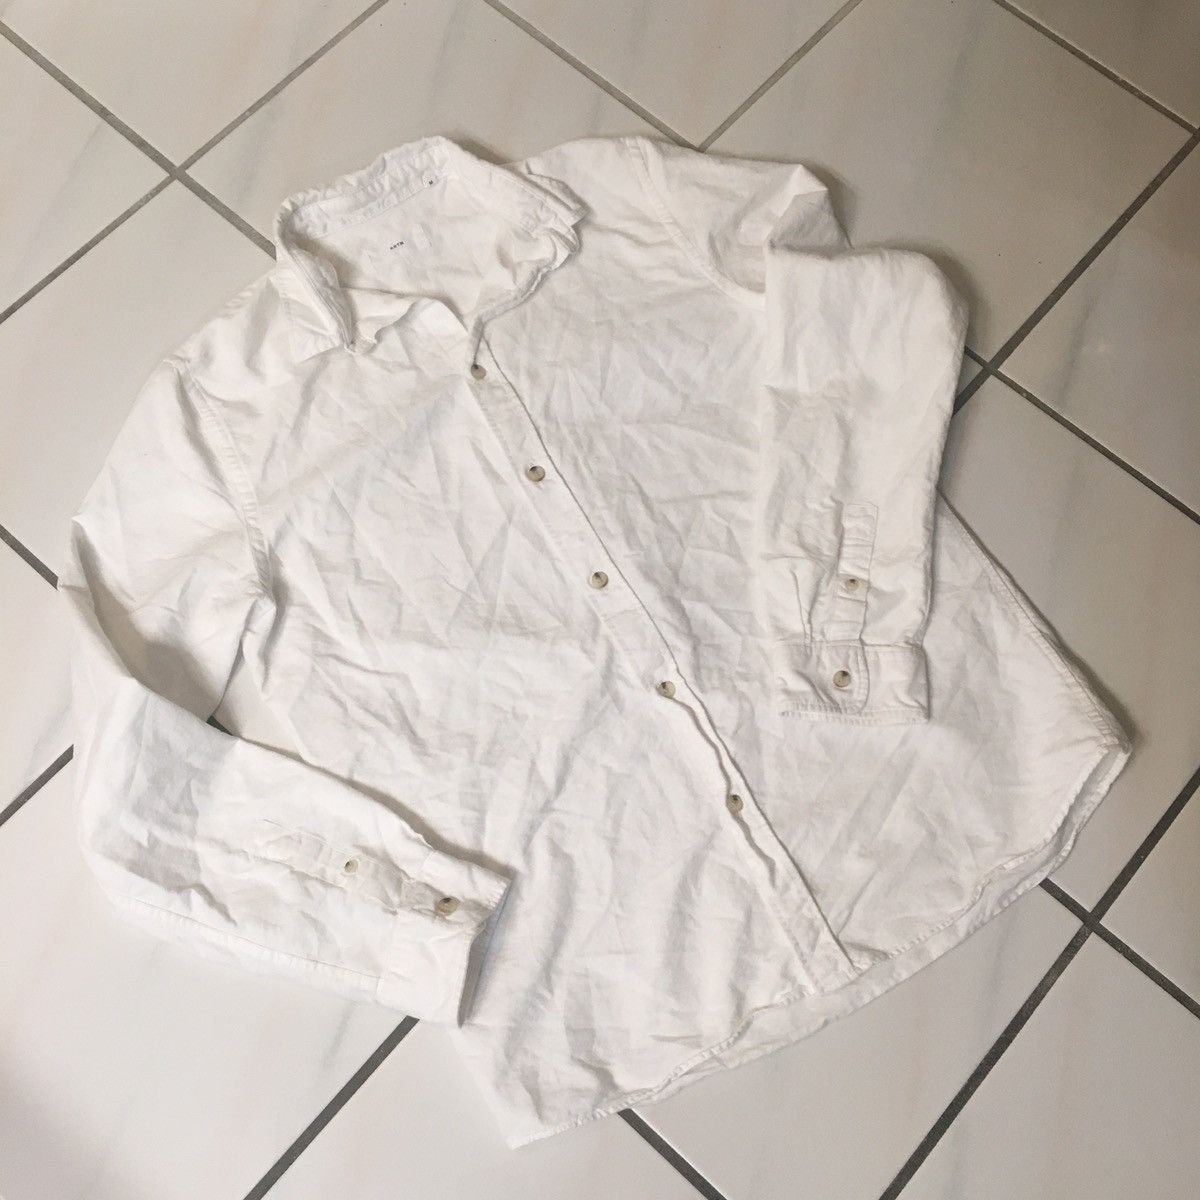 Kotn Kotn white button up. - loose | Grailed